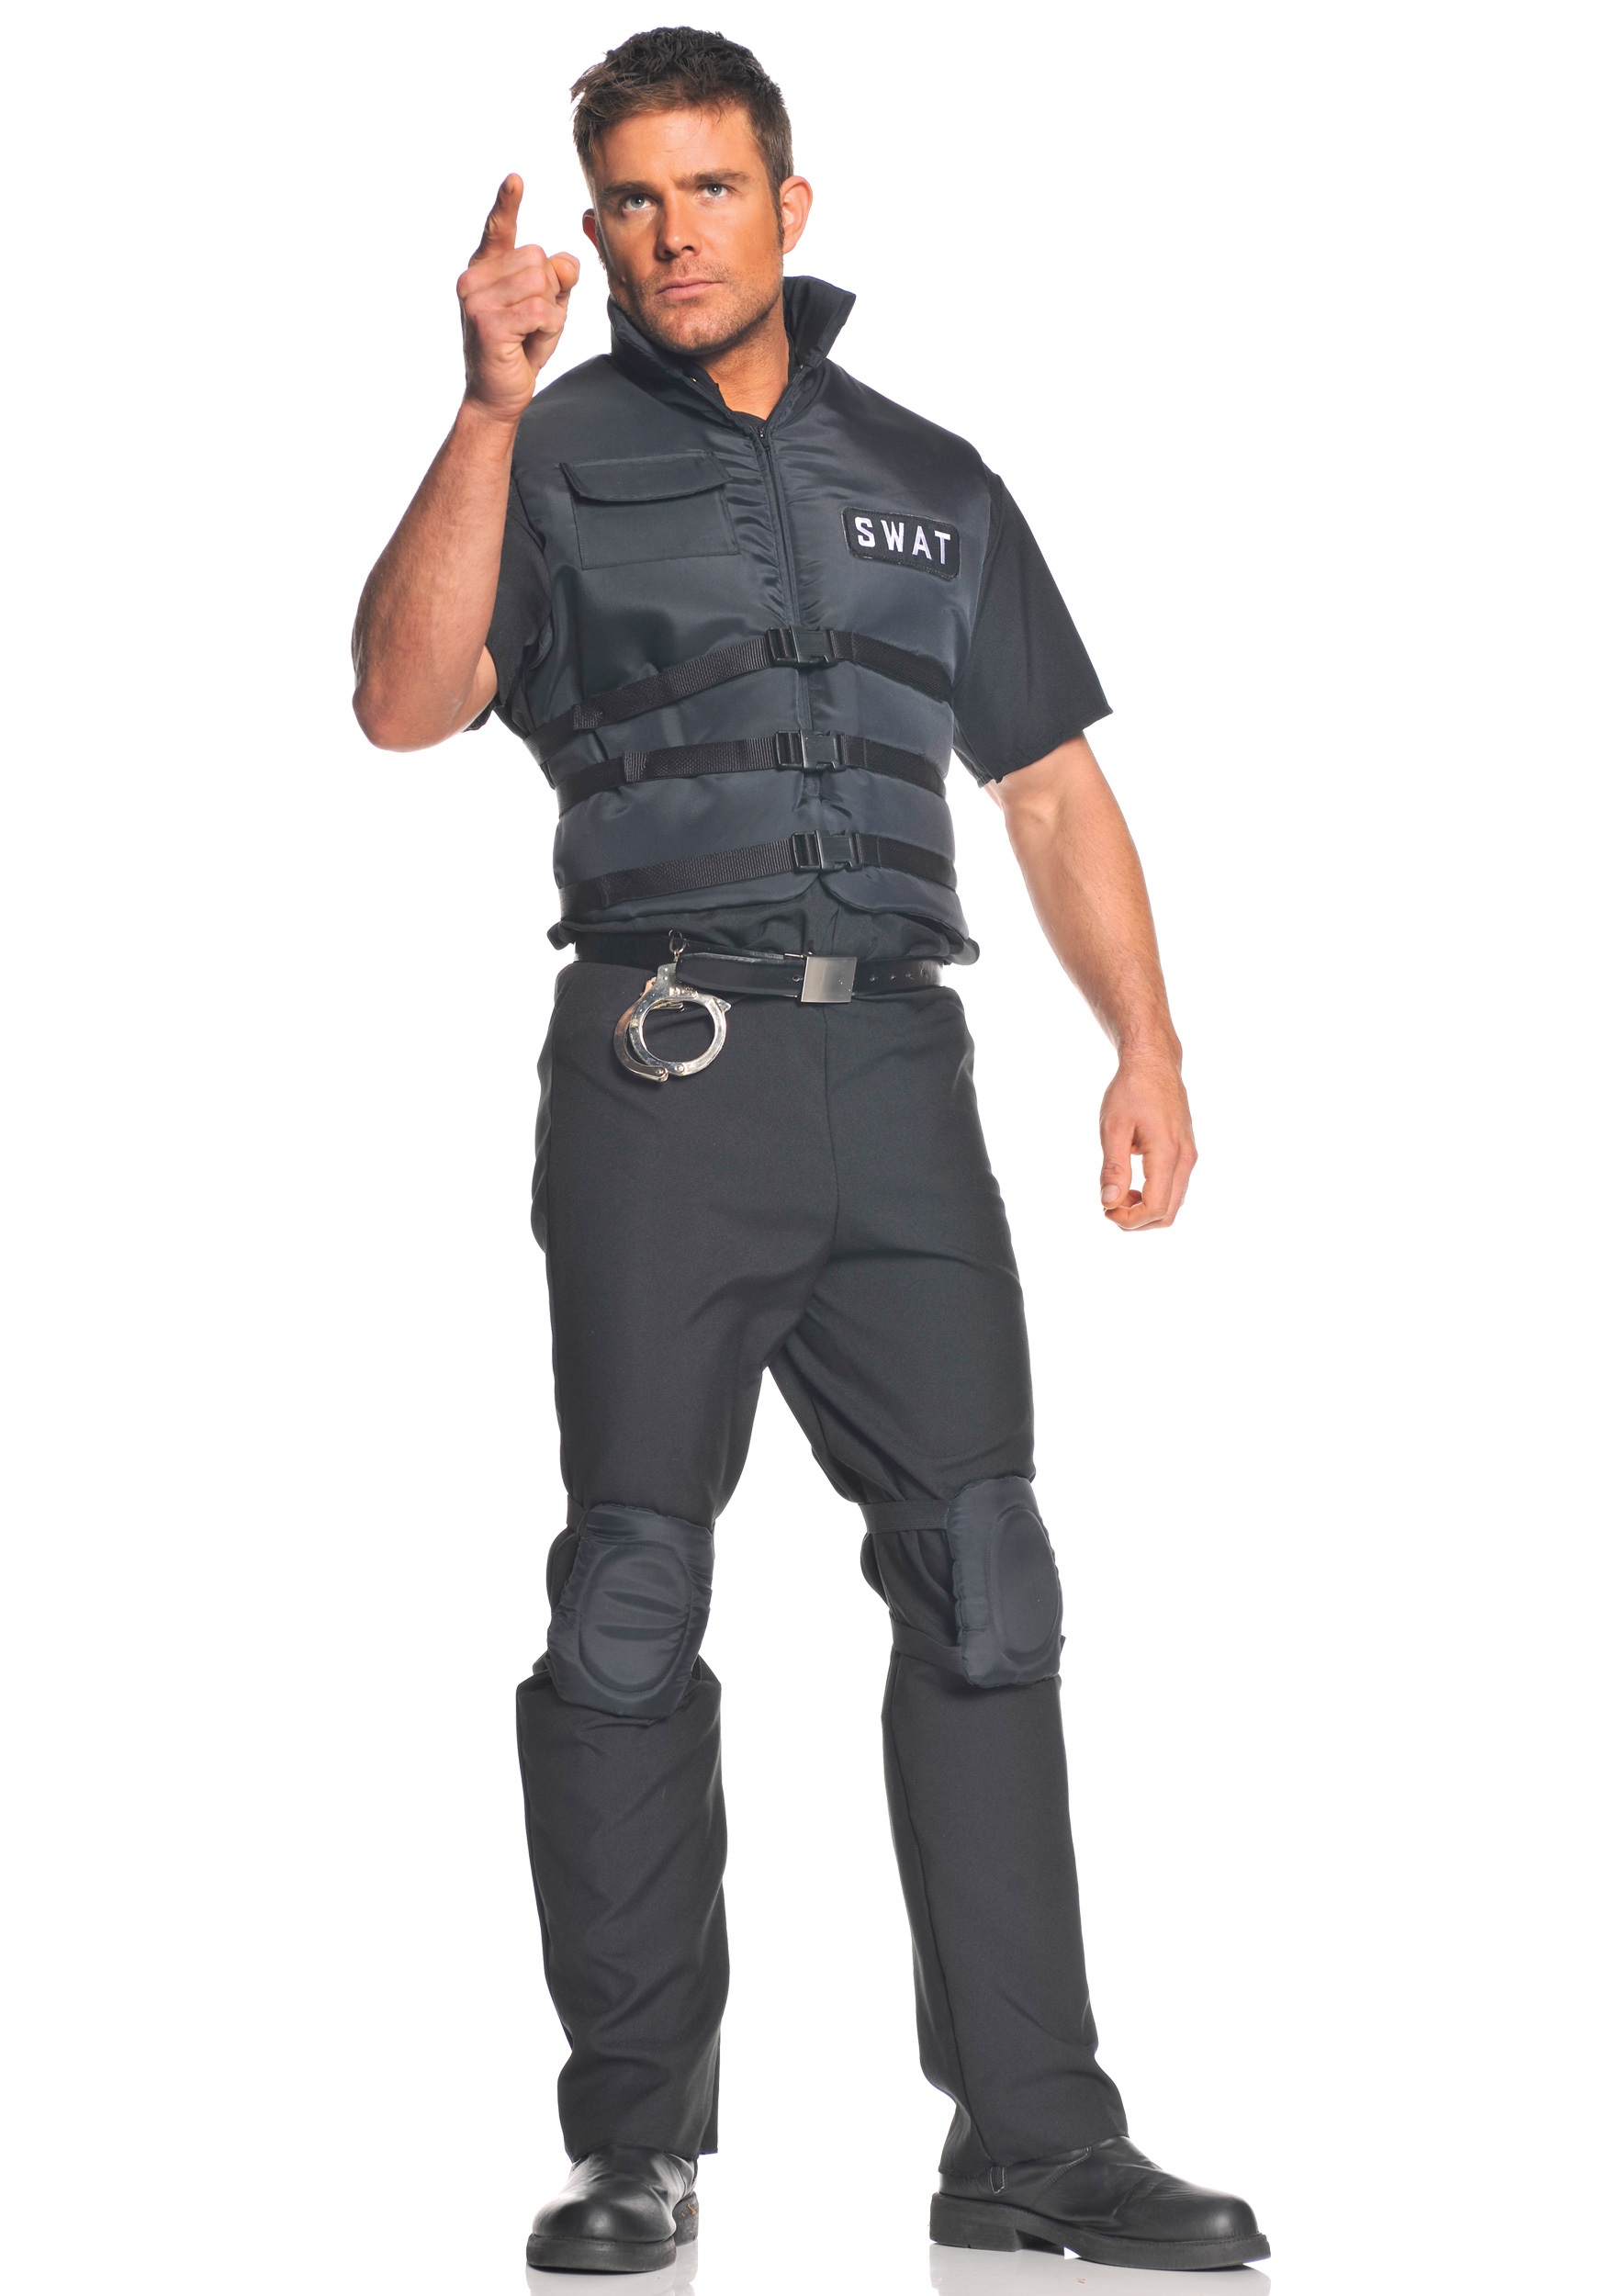 Size SWAT Officer Costume - 2022